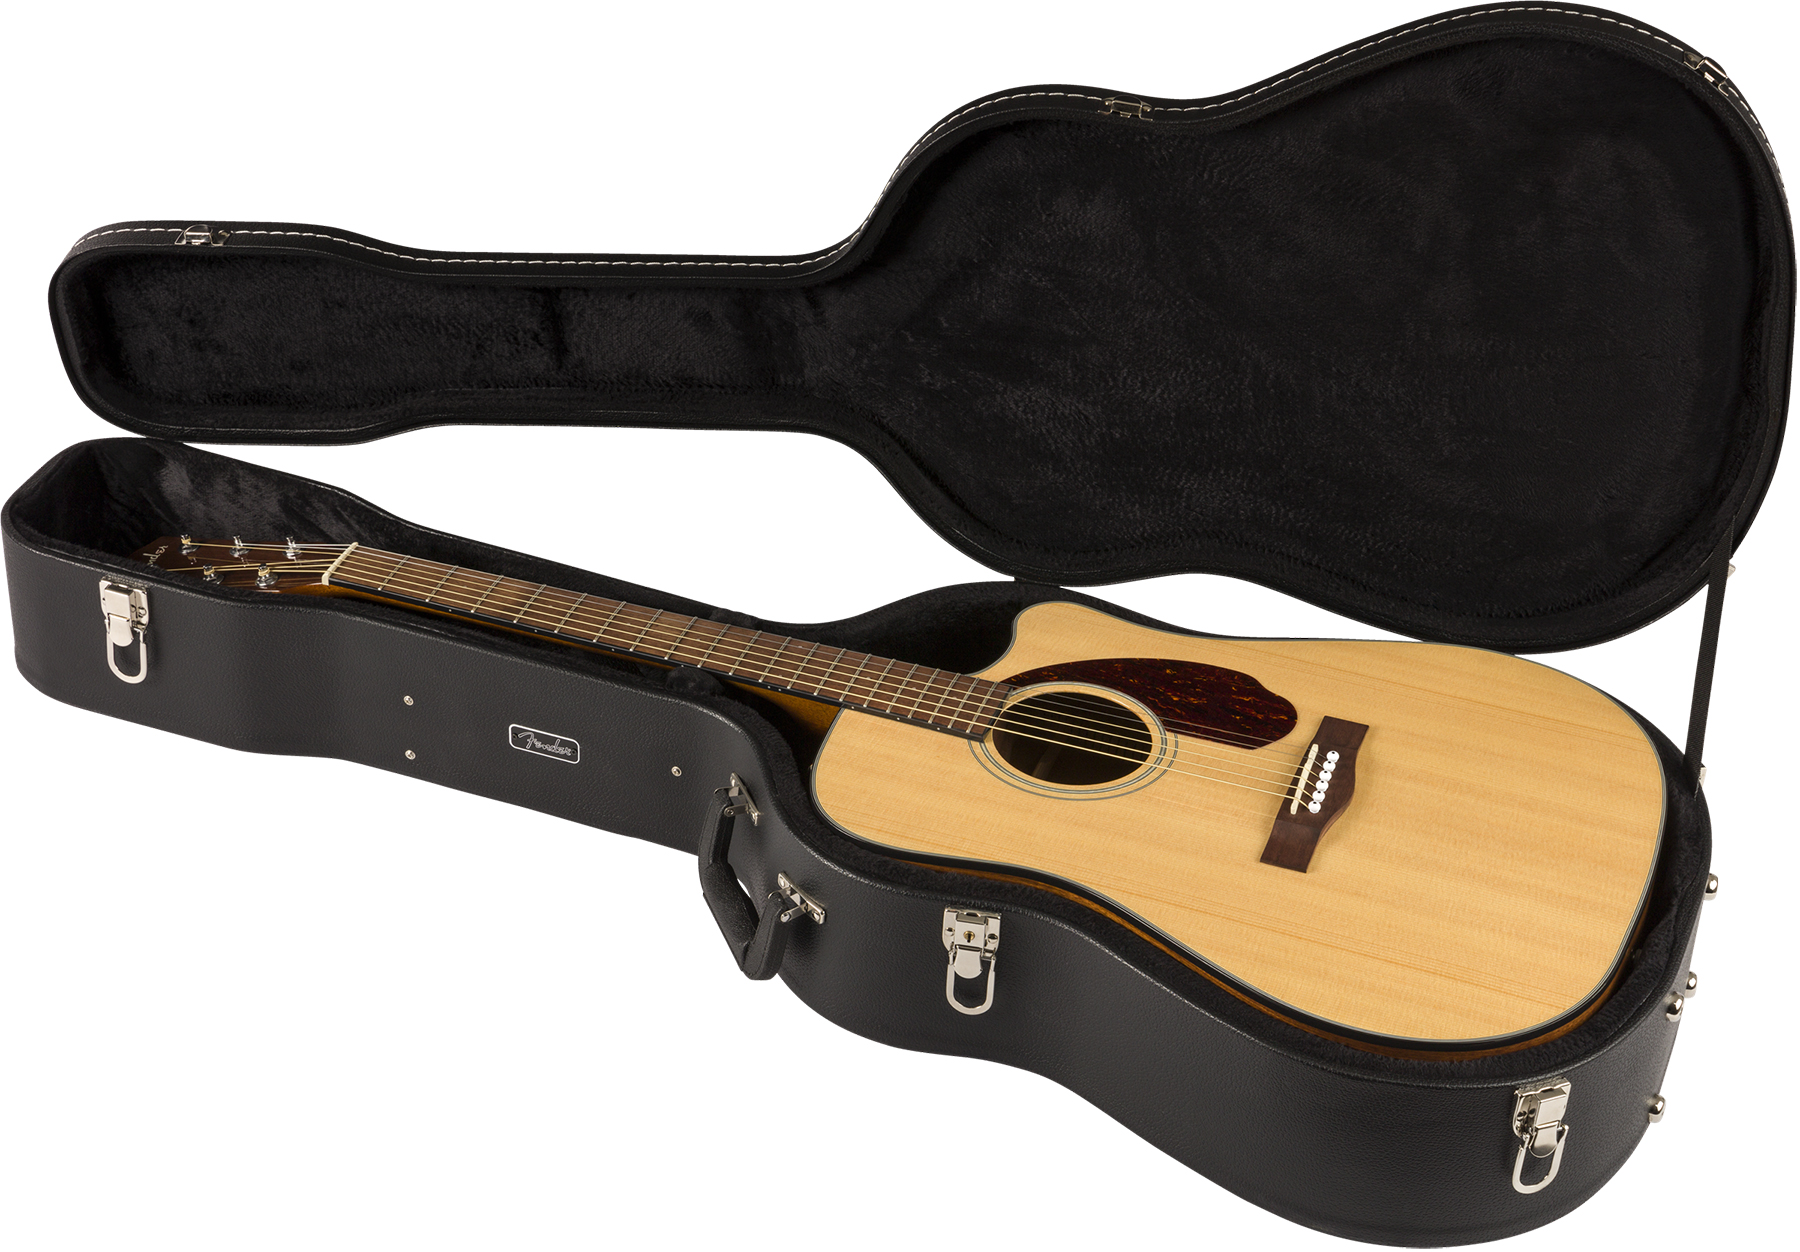 Fender Cd-140sce Classic Design Dreadnought Cw Epicea Ovangkol Wal +etui - Natural - Guitare Electro Acoustique - Variation 5